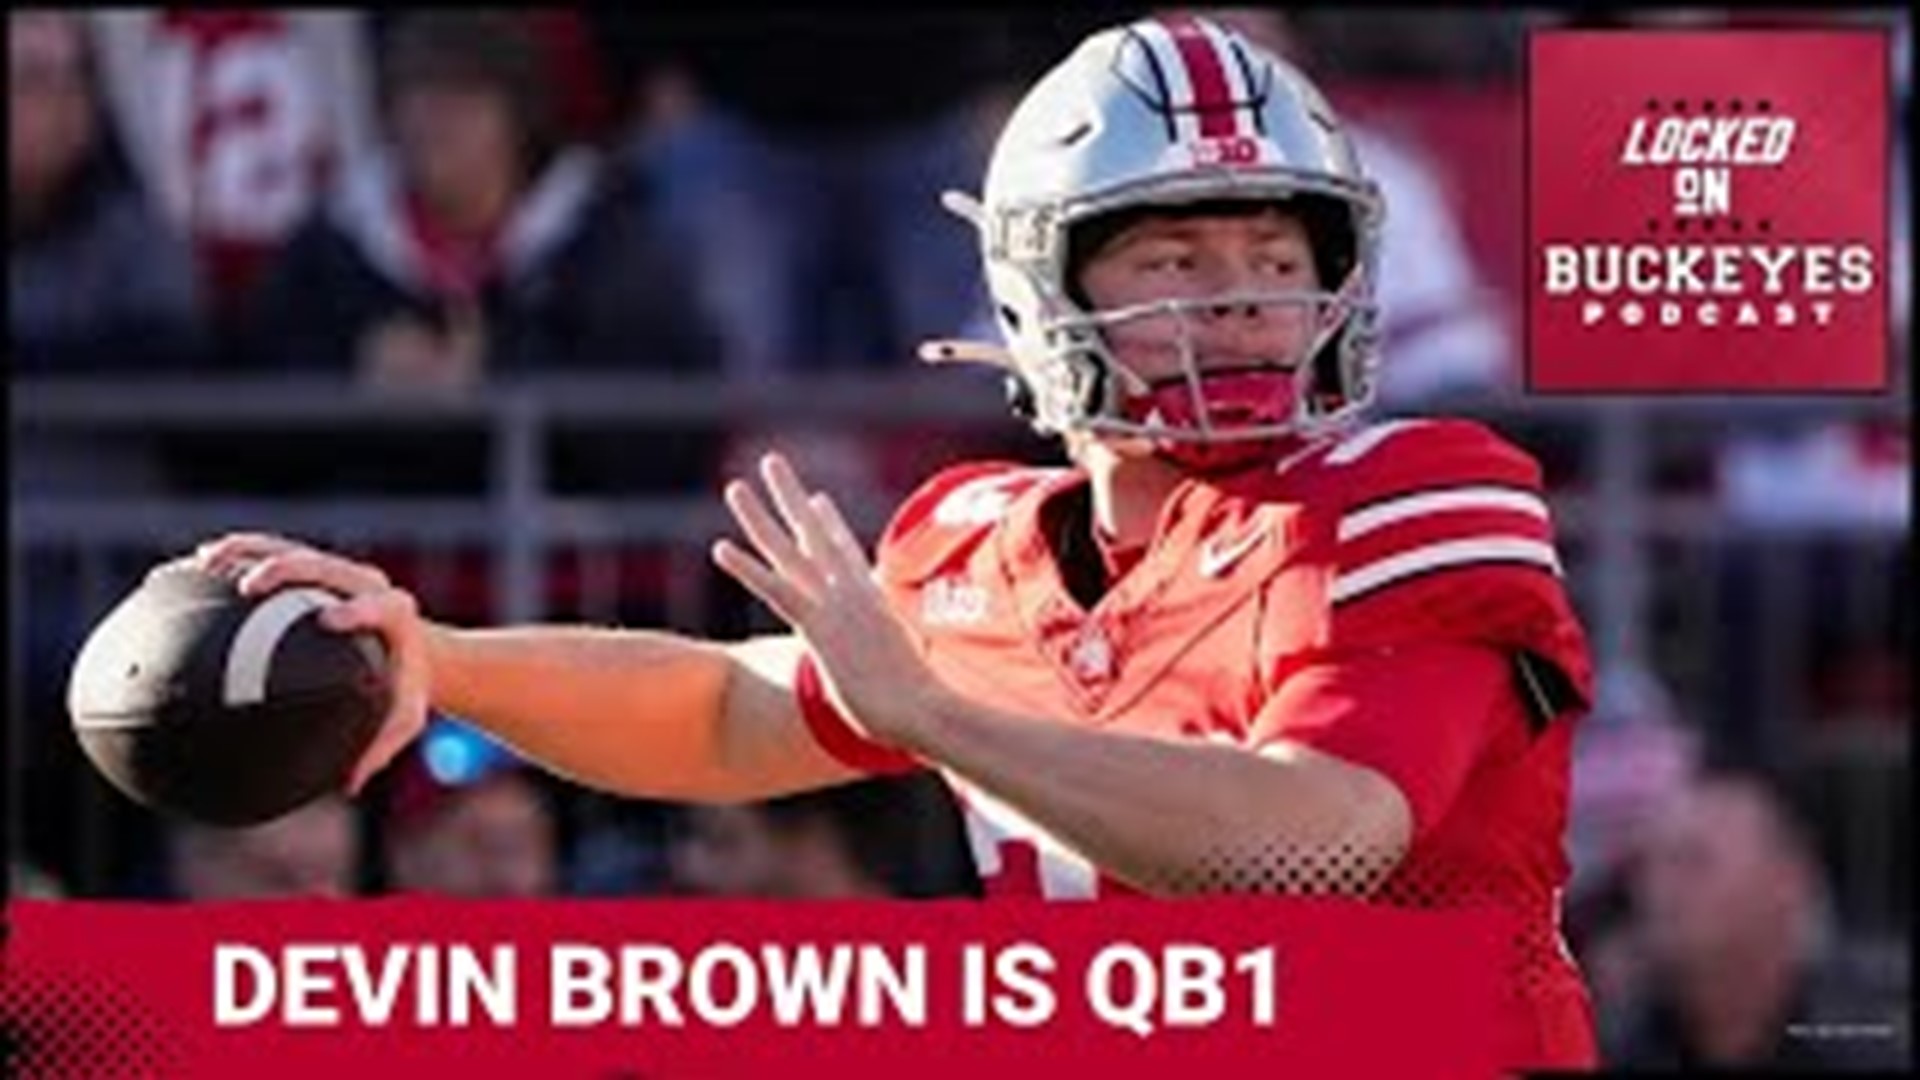 Ohio State QB Devin Brown is Confident, Ready to Start in Cotton Bowl | Ohio State Buckeyes Podcast